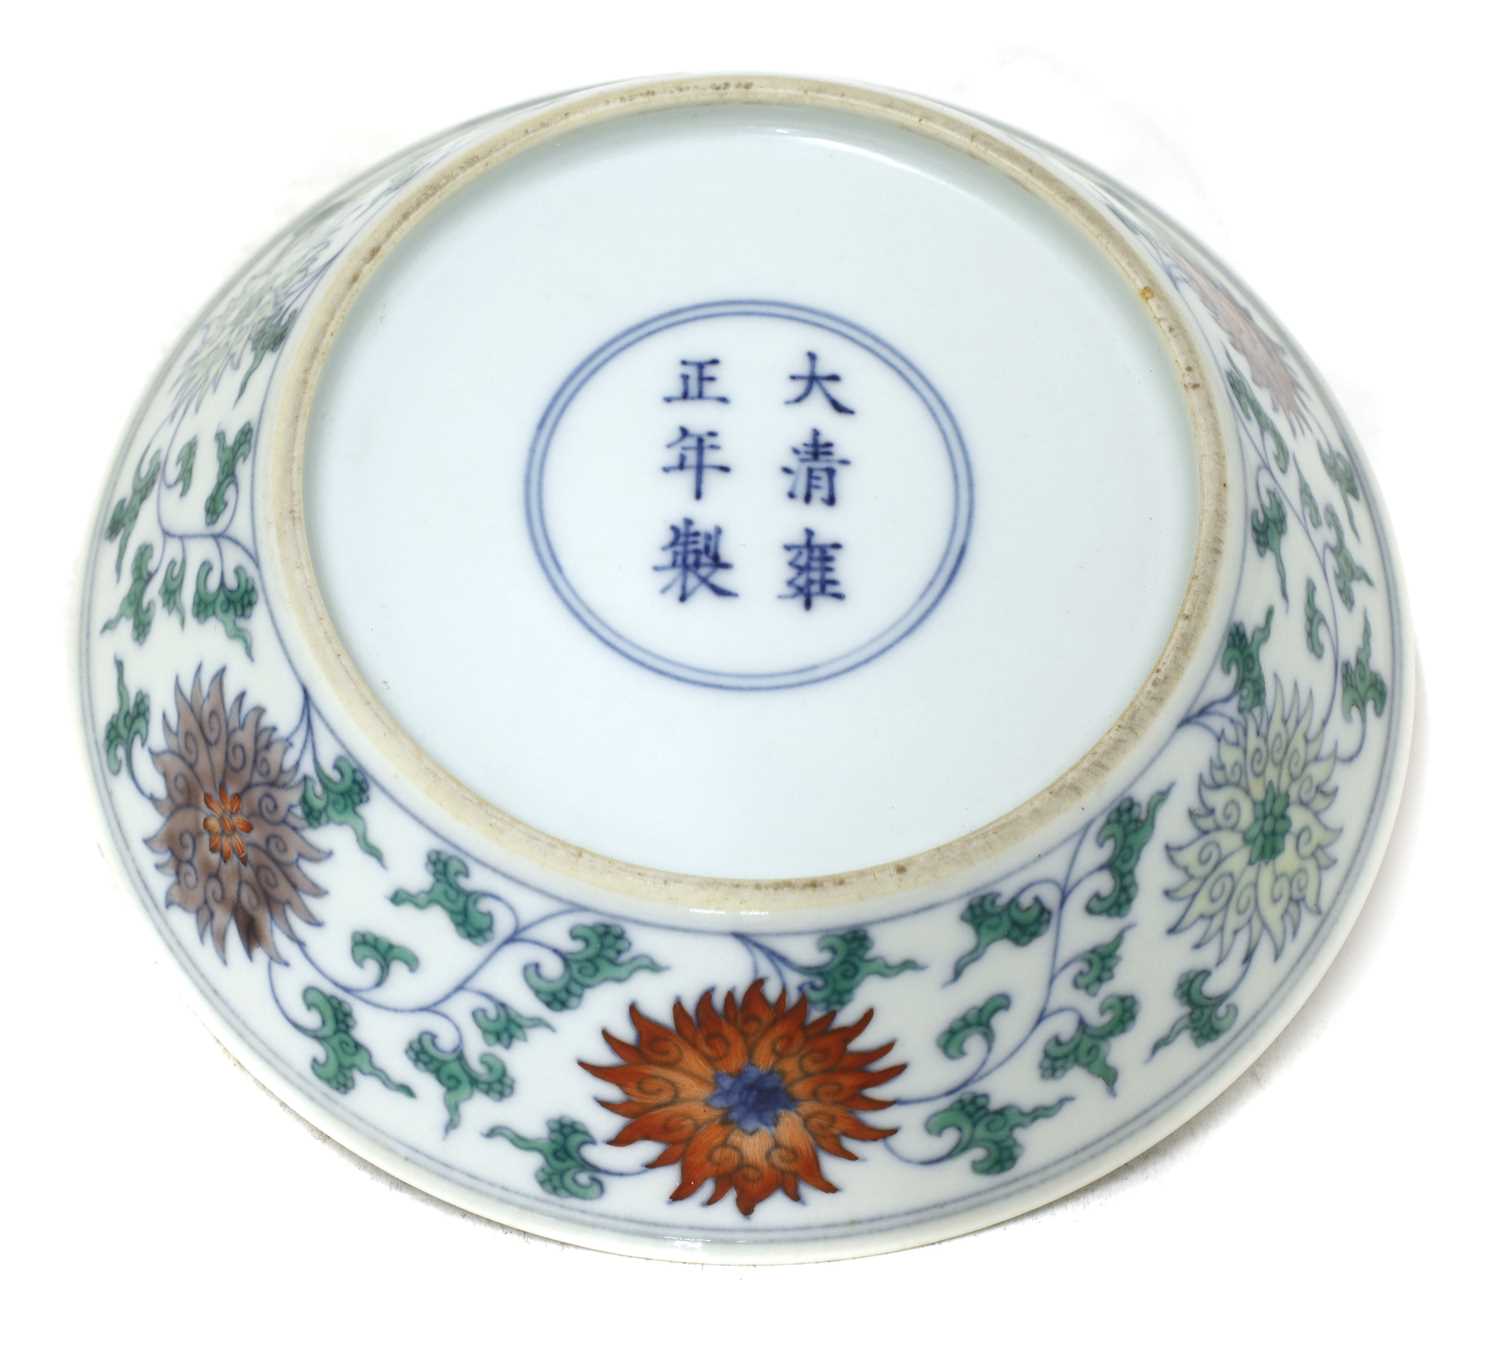 Lot 303 - A Chinese doucai plate